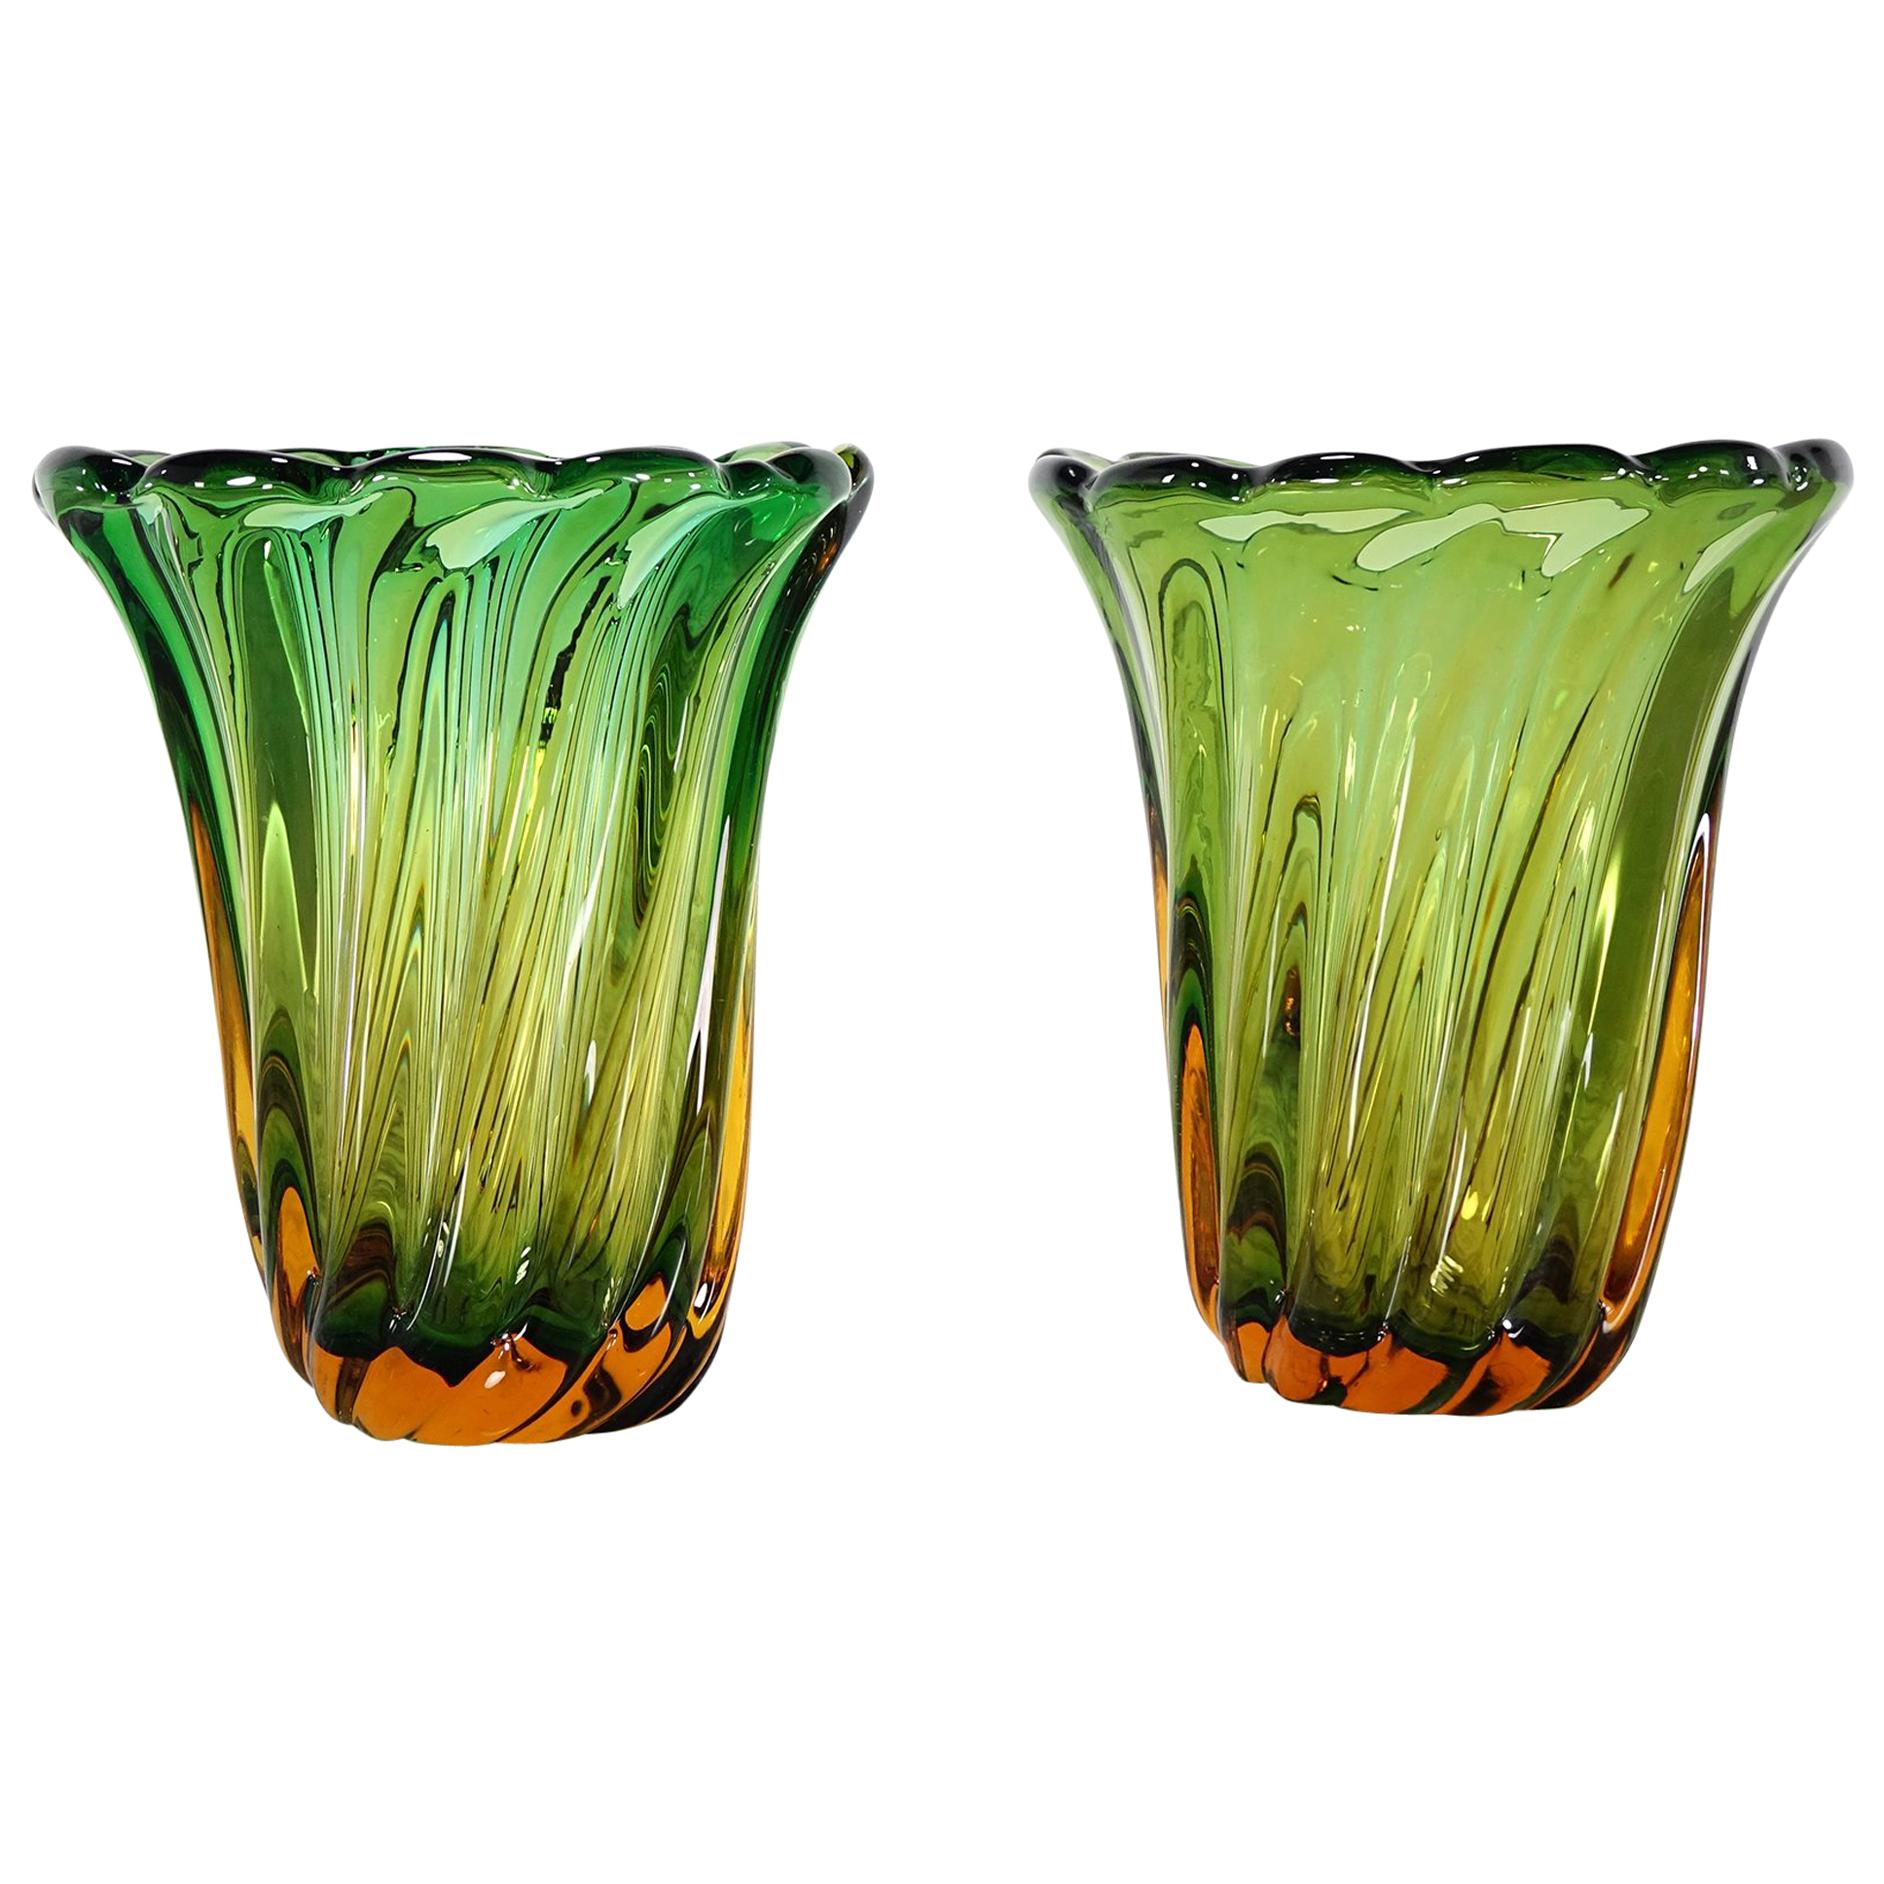 Rare Pair of Large Sized Green Murano Vases, Unique Colorful Masterpiece